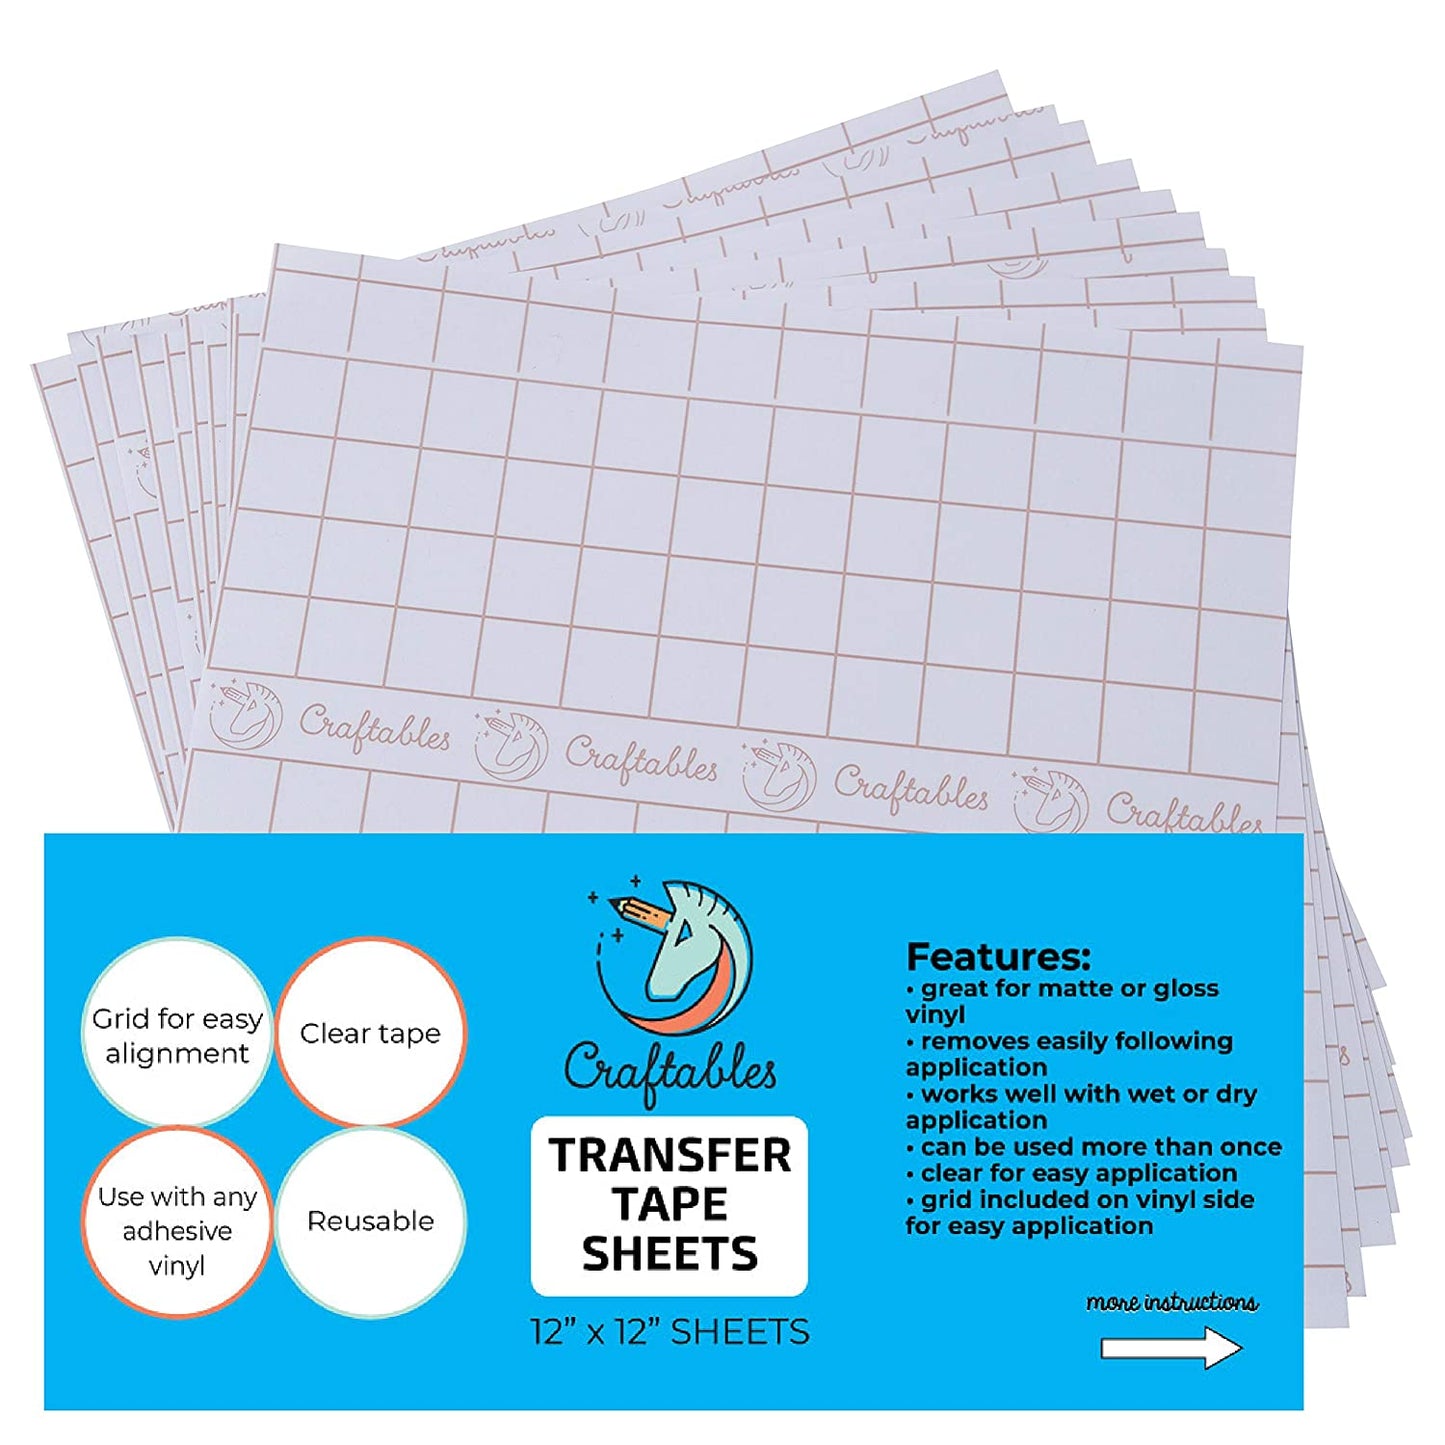 Transfer Tape Sheets For Adhesive Vinyl By Craftables